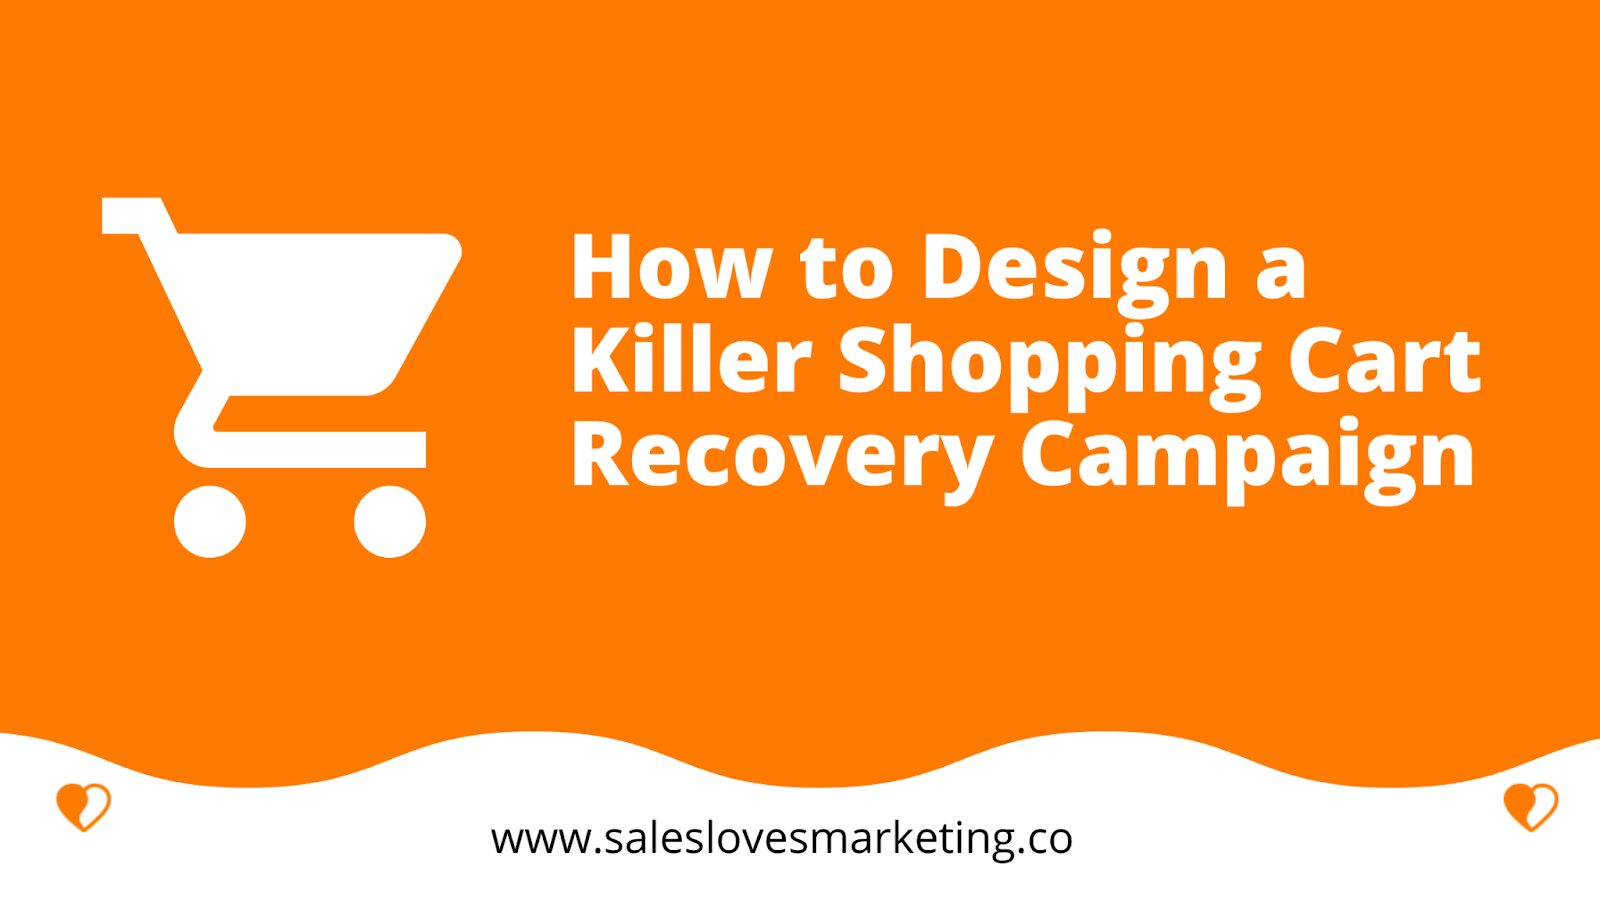 How to Design a Killer Shopping Cart Recovery Campaign: Your Complete Guide (+ Real-World Examples)